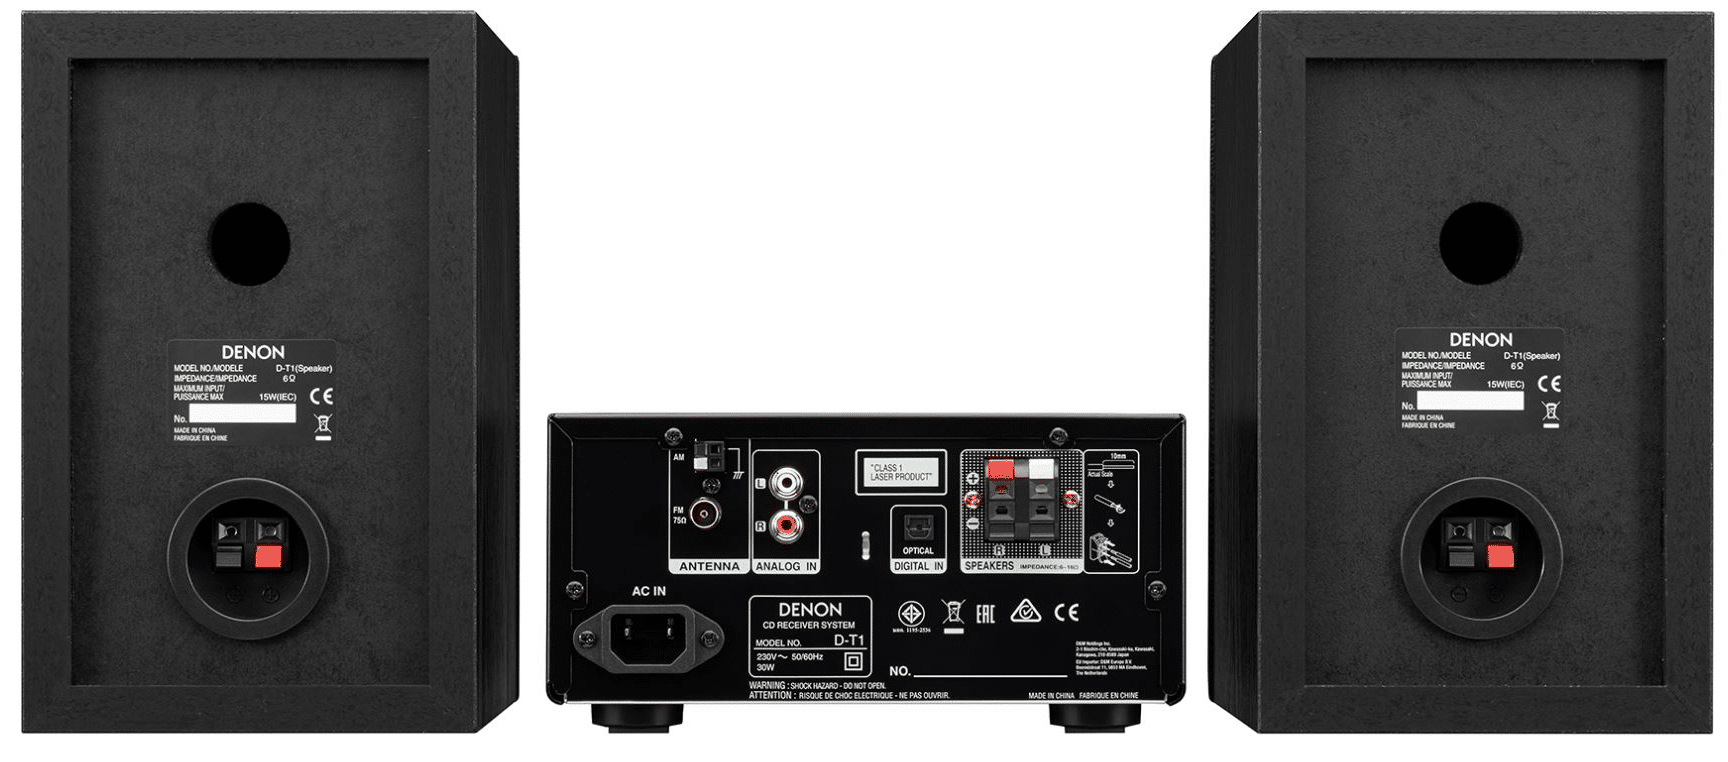 D-T1 compact system From Denon